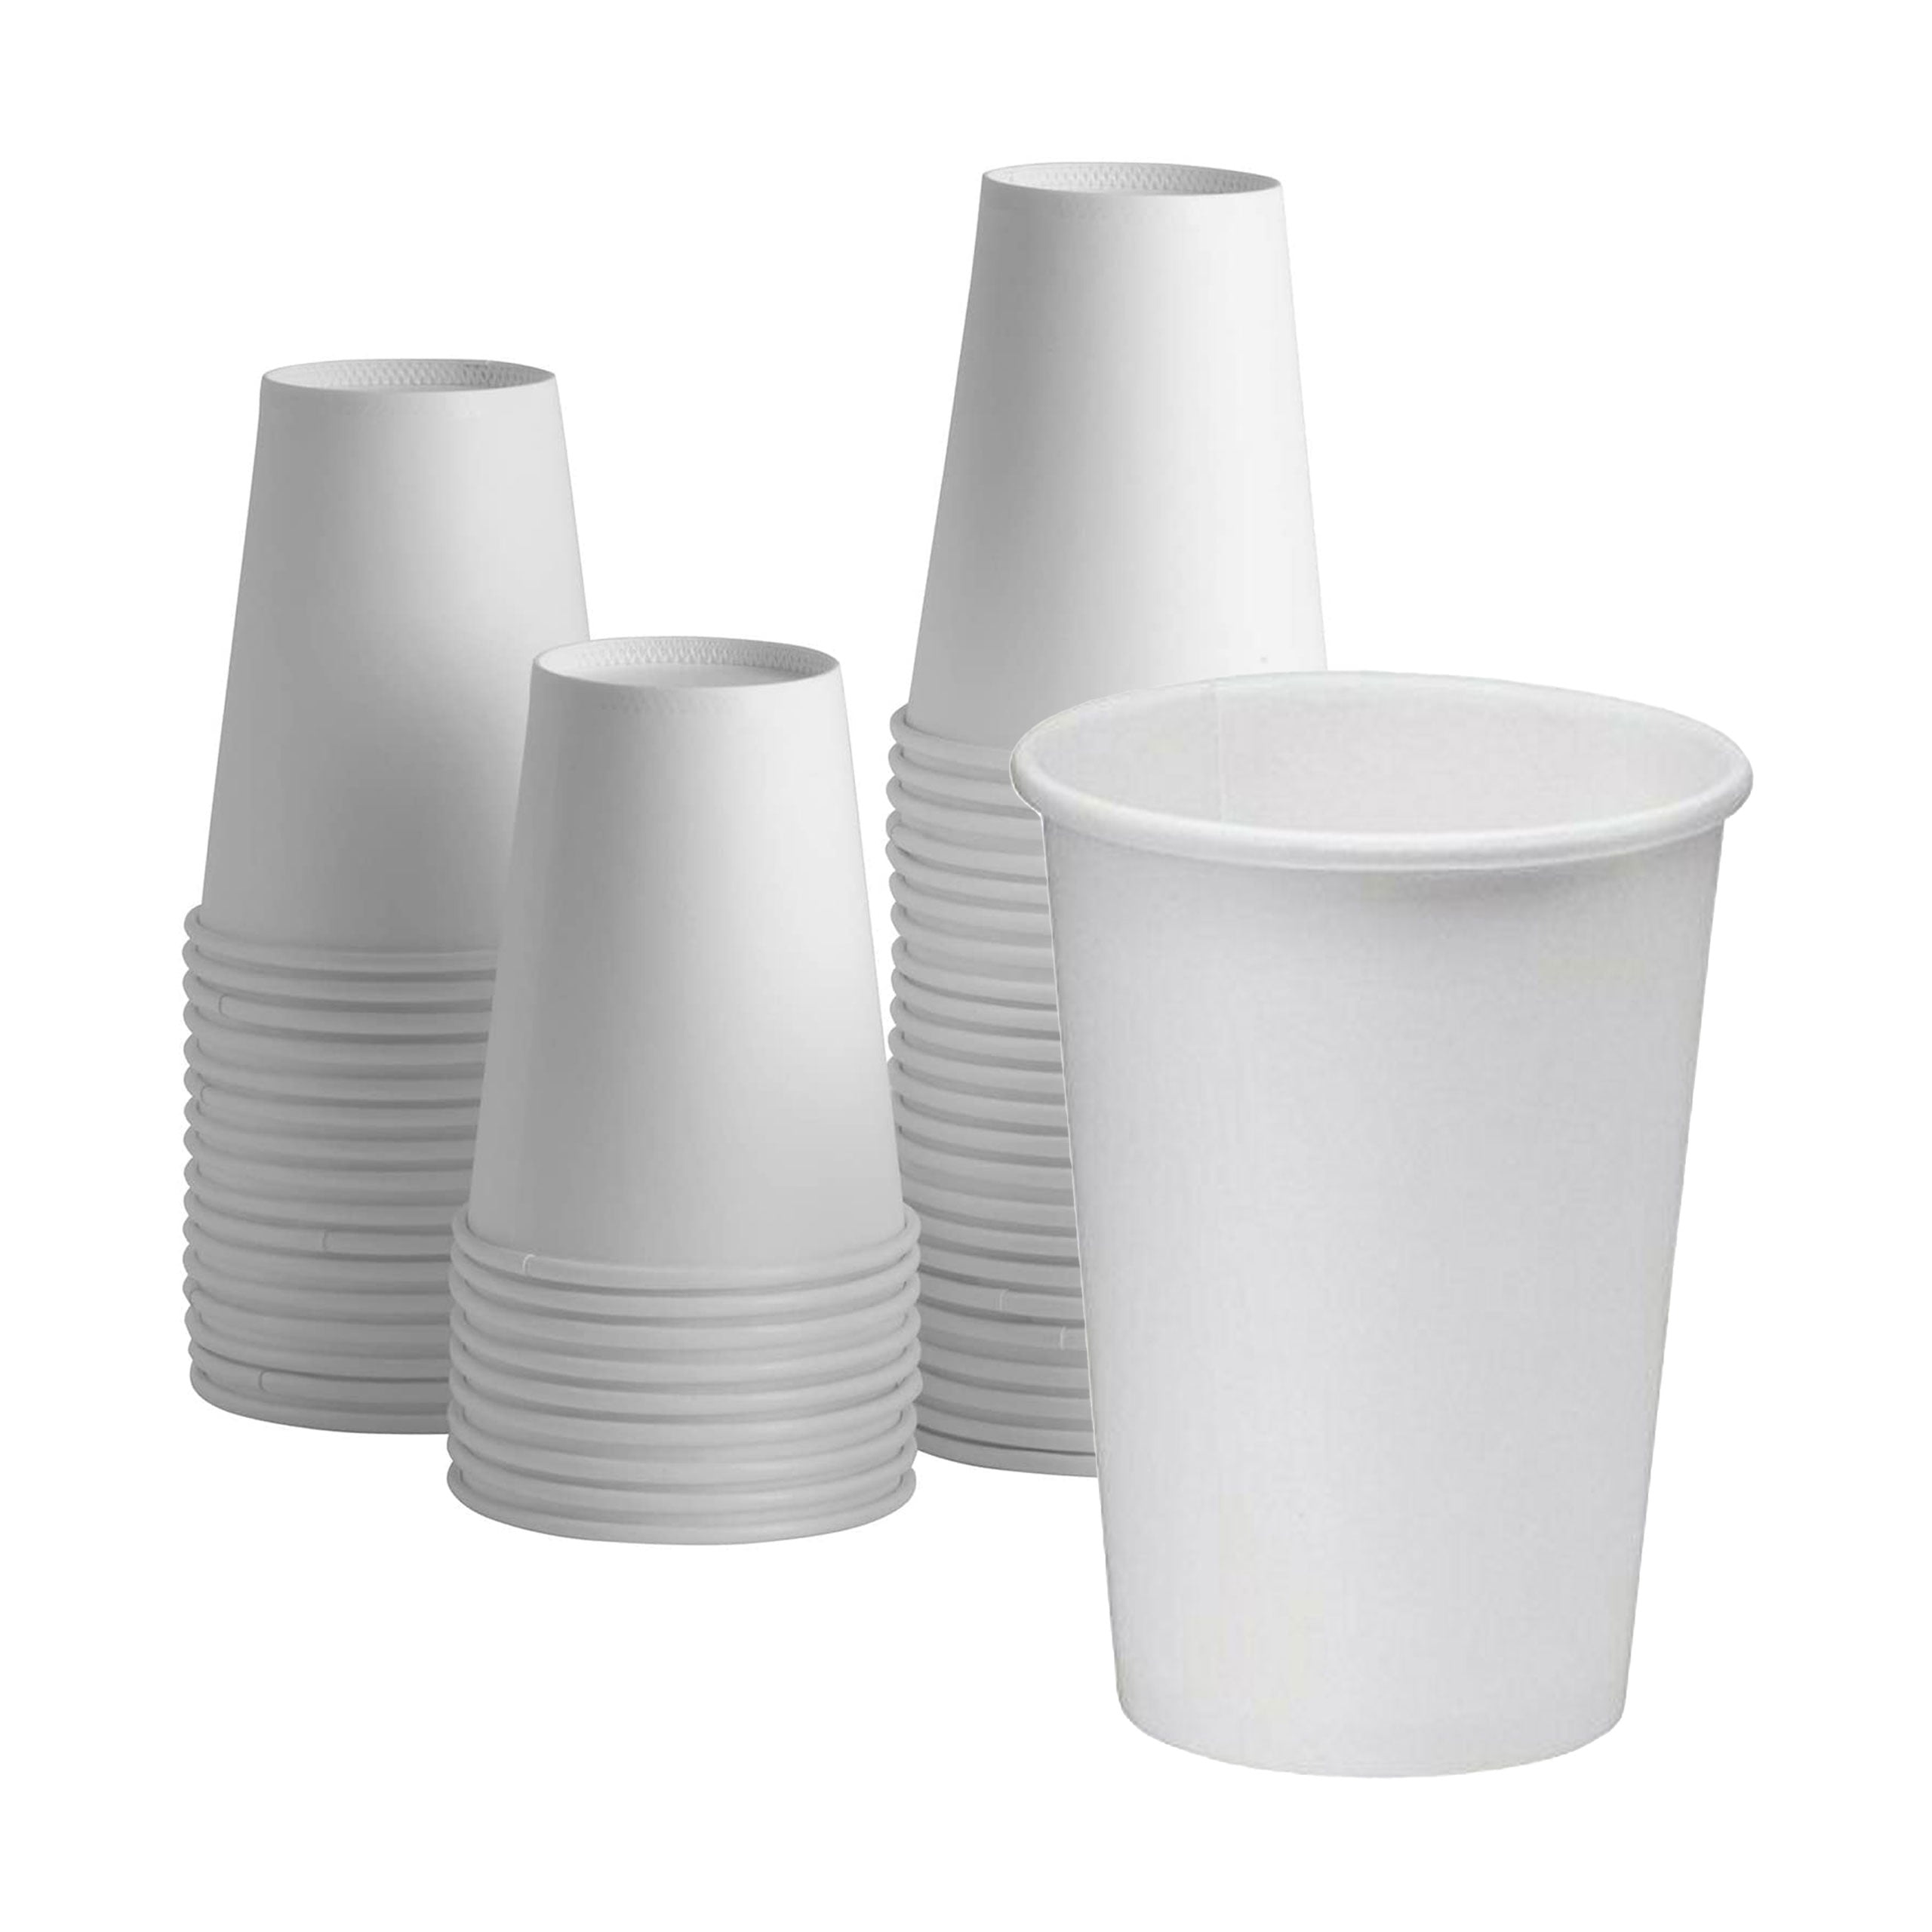 1000x 12oz Disposable Paper Cups with Lids 1000 Pack  for tea/coffee U.K Seller 